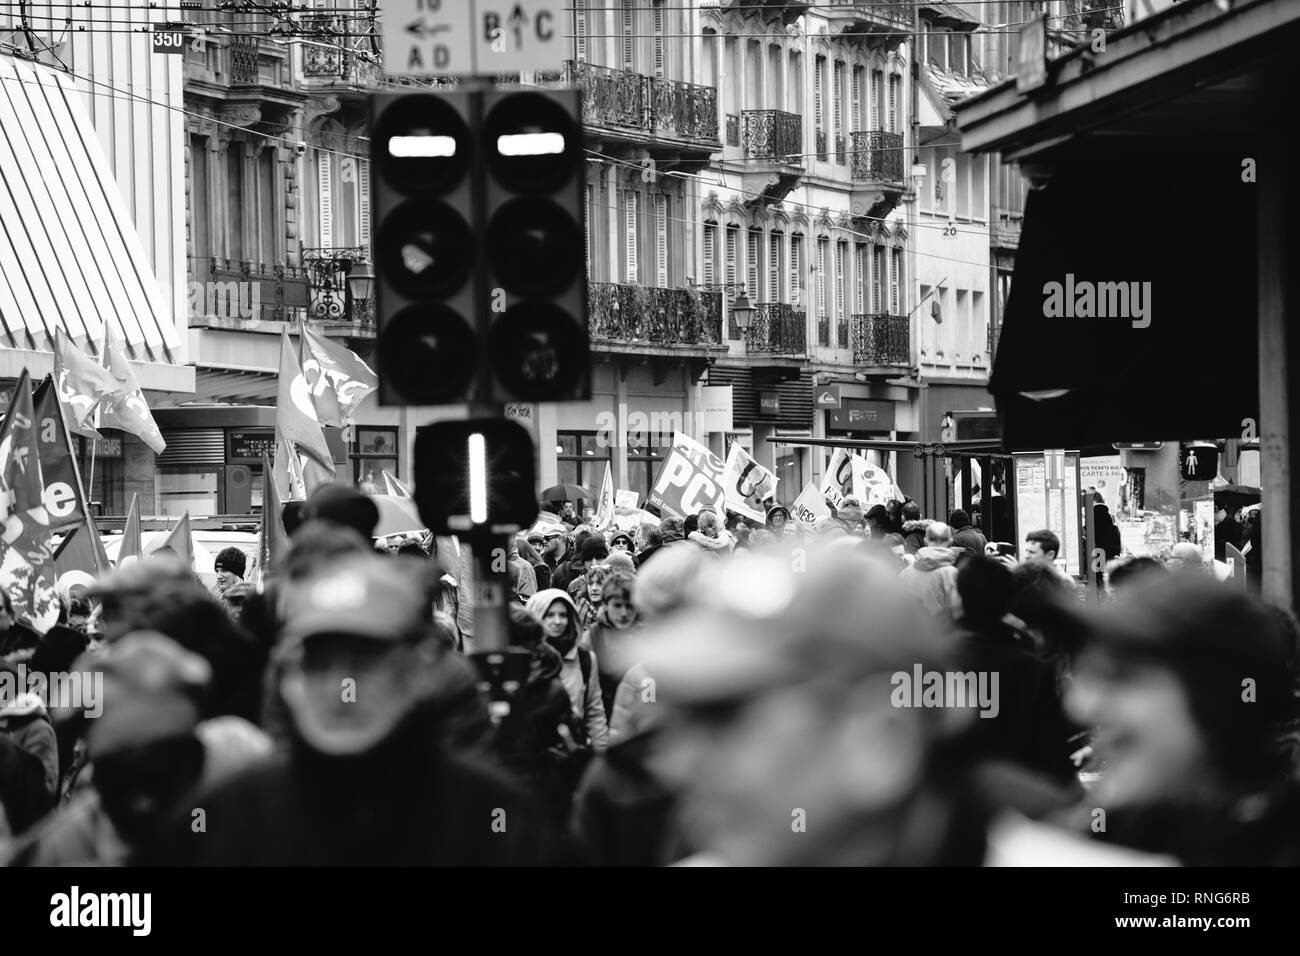 STRASBOURG, FRANCE - MAR 22, 2018: CGT General Confederation of Labour workers with placard at demonstration protest against Macron French government string of reforms - black and white of protestors Stock Photo